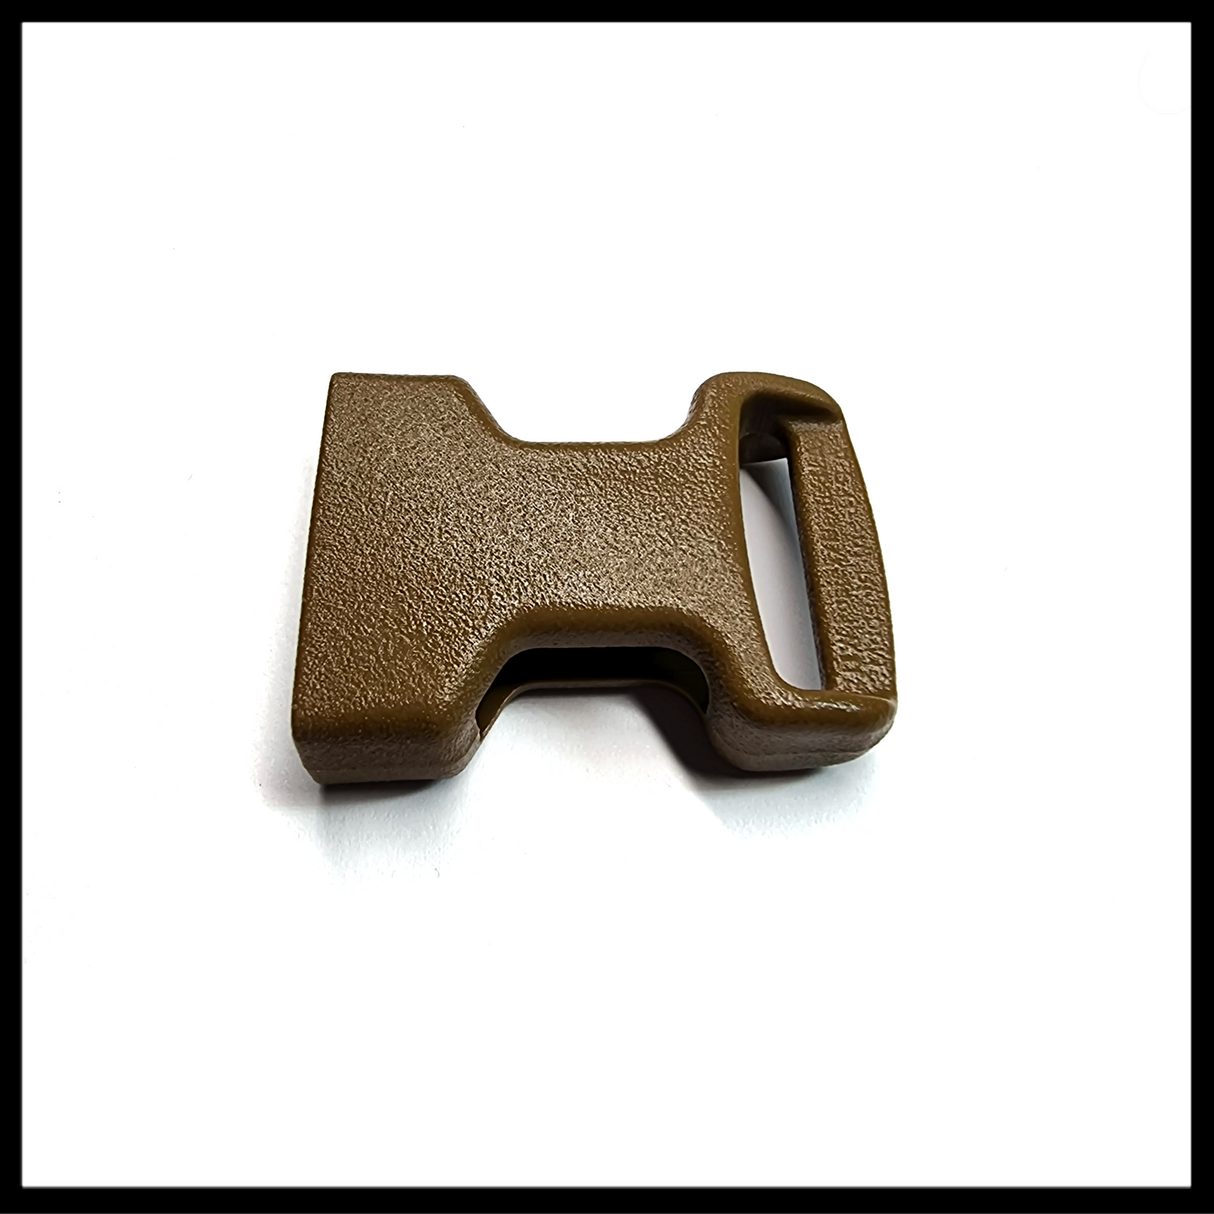 ITW GTSR Side Release Buckle 25mm Coyote Brown Female